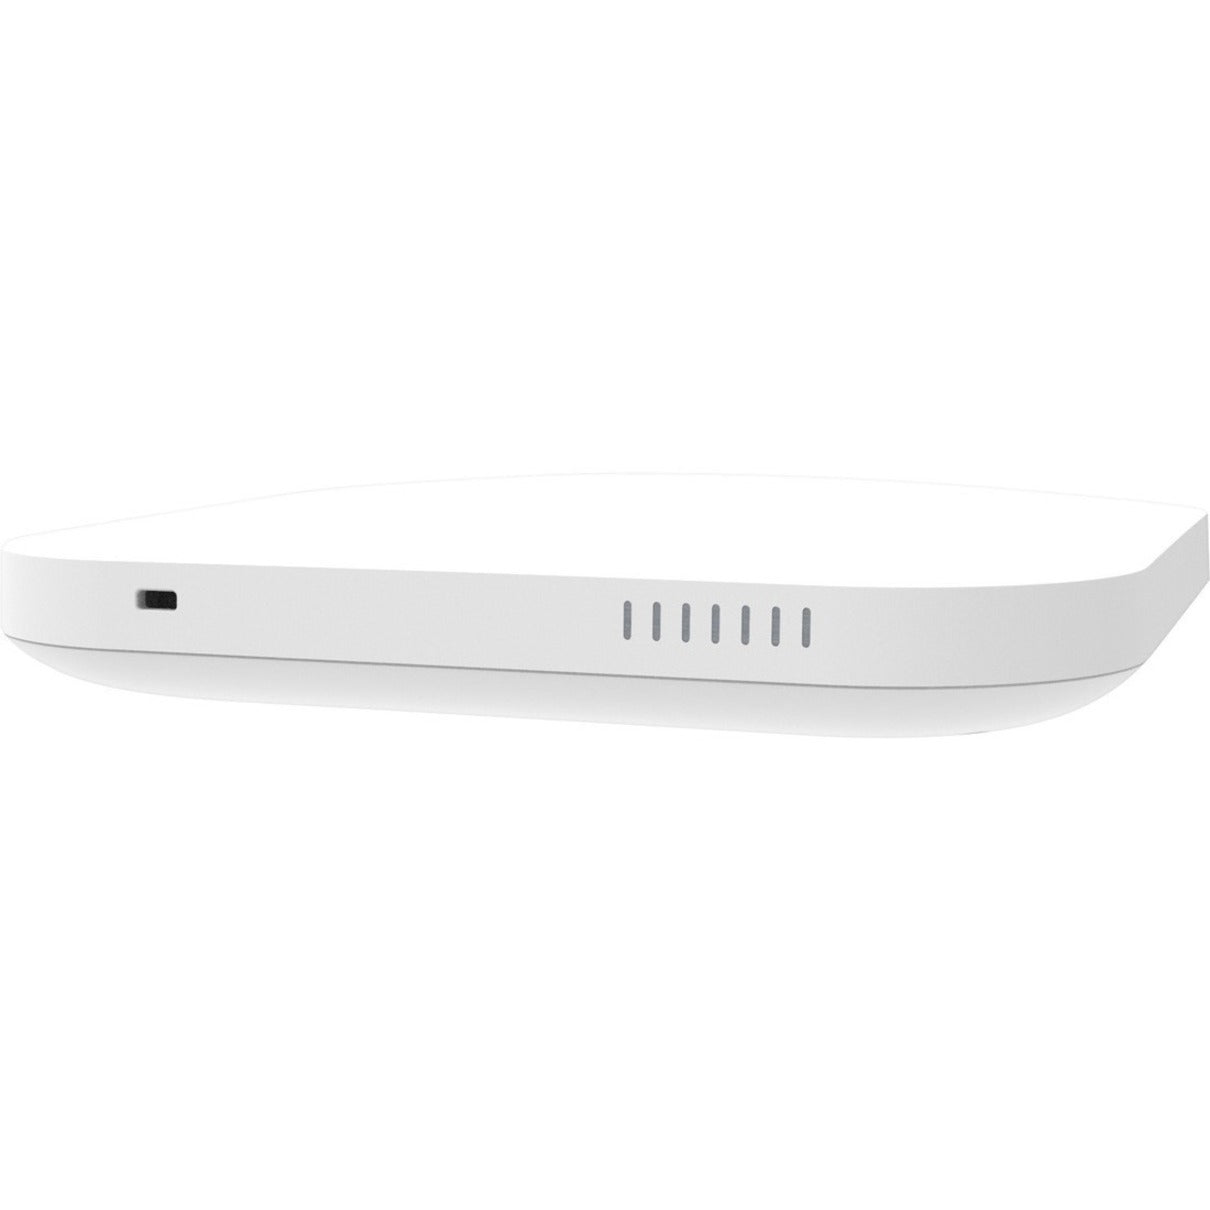 SonicWall 03-SSC-0350 SonicWave 641 Wireless Access Point, Secure Upgrade Plus with Secure Cloud WiFi Management and Support 3YR